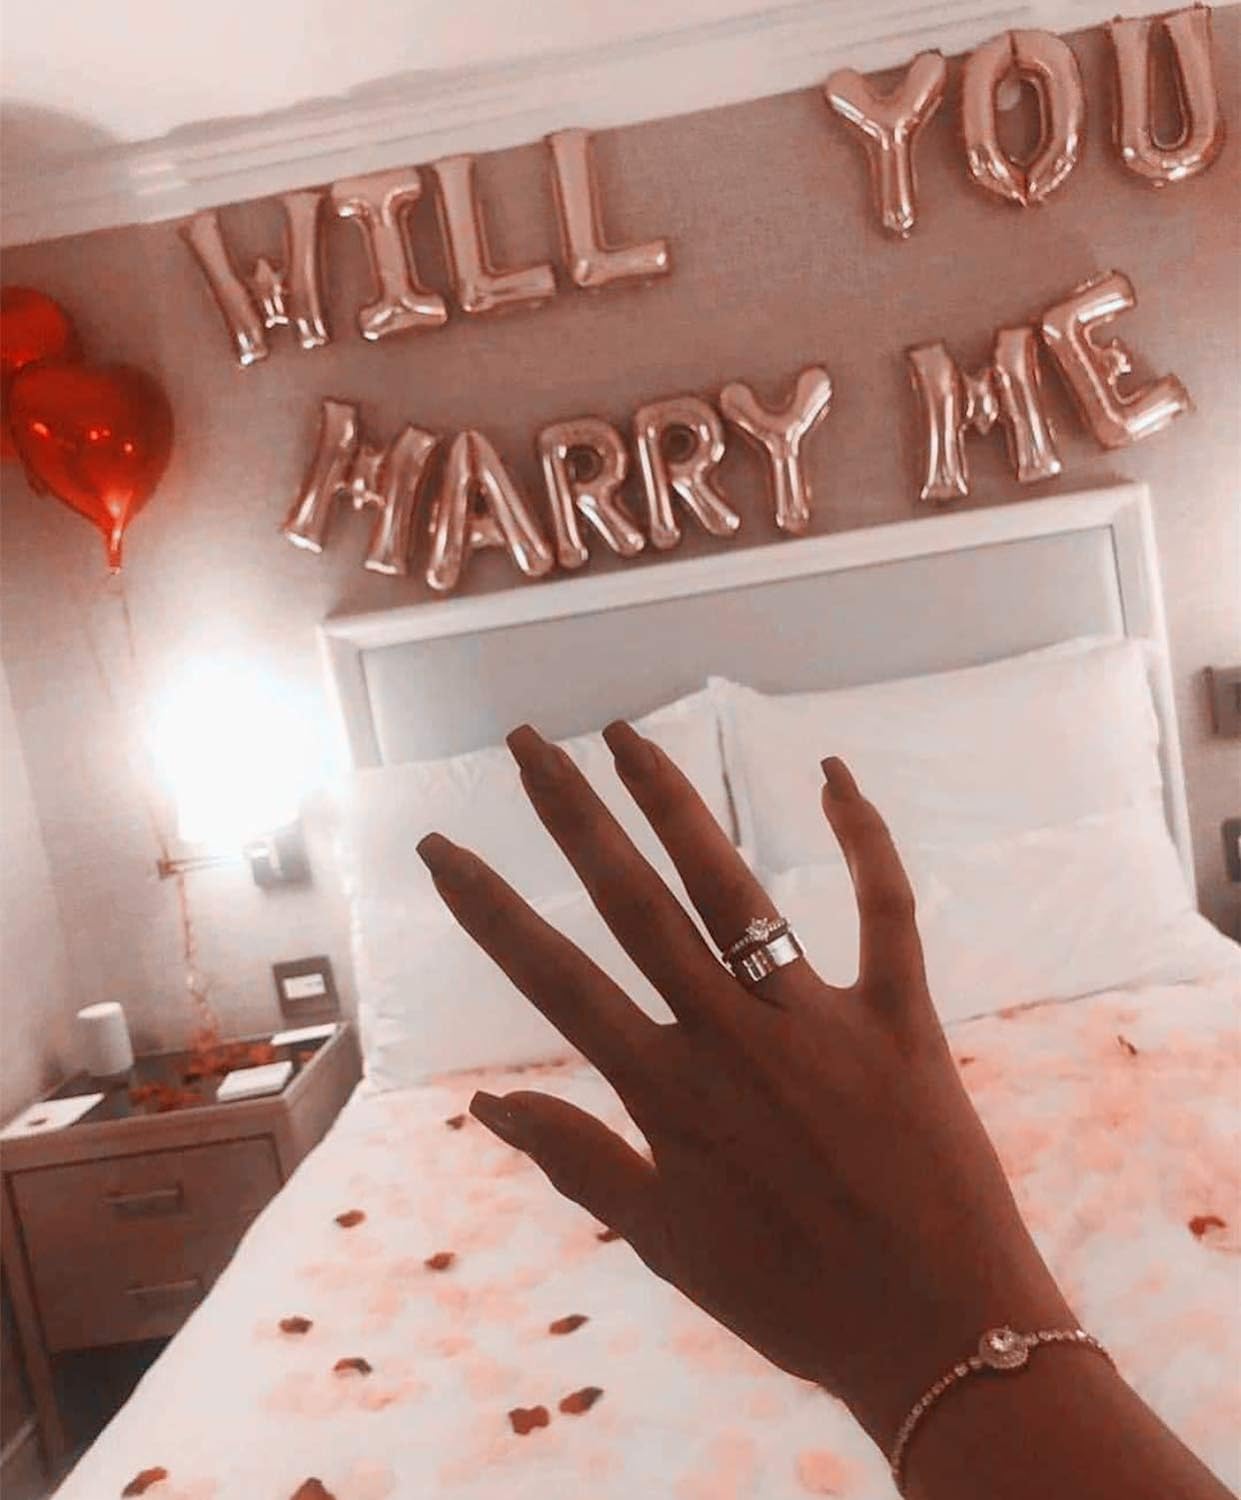 WILL YOU MARRY ME package